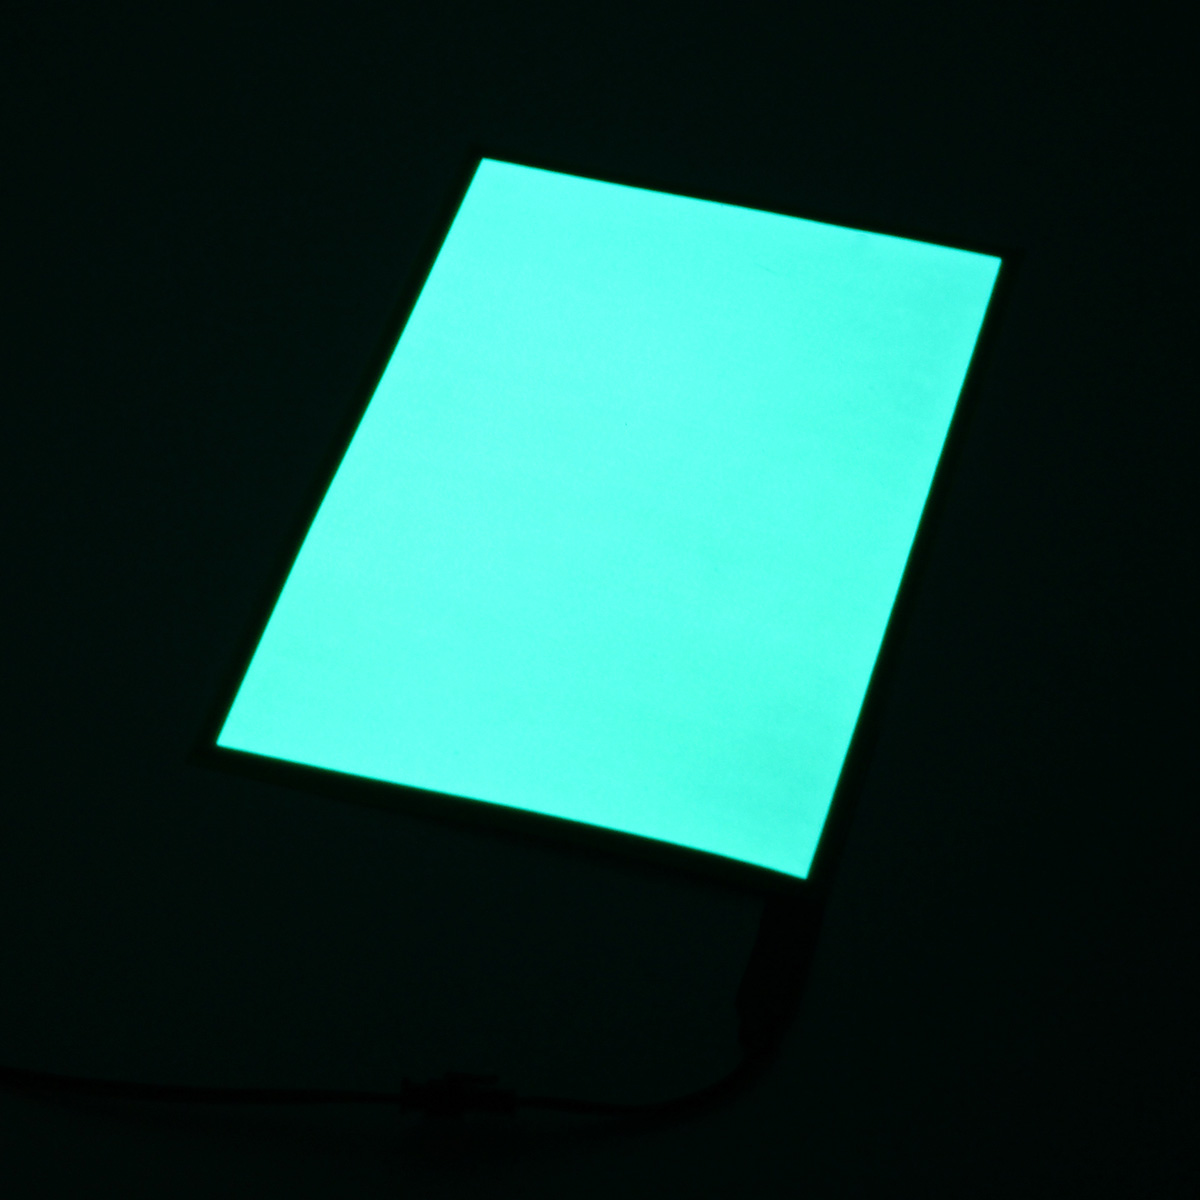 12V-A5-EL-Panel-Electroluminescent-Cuttable-Light-With-Inverter-Paper-Neon-Sheet-1112330